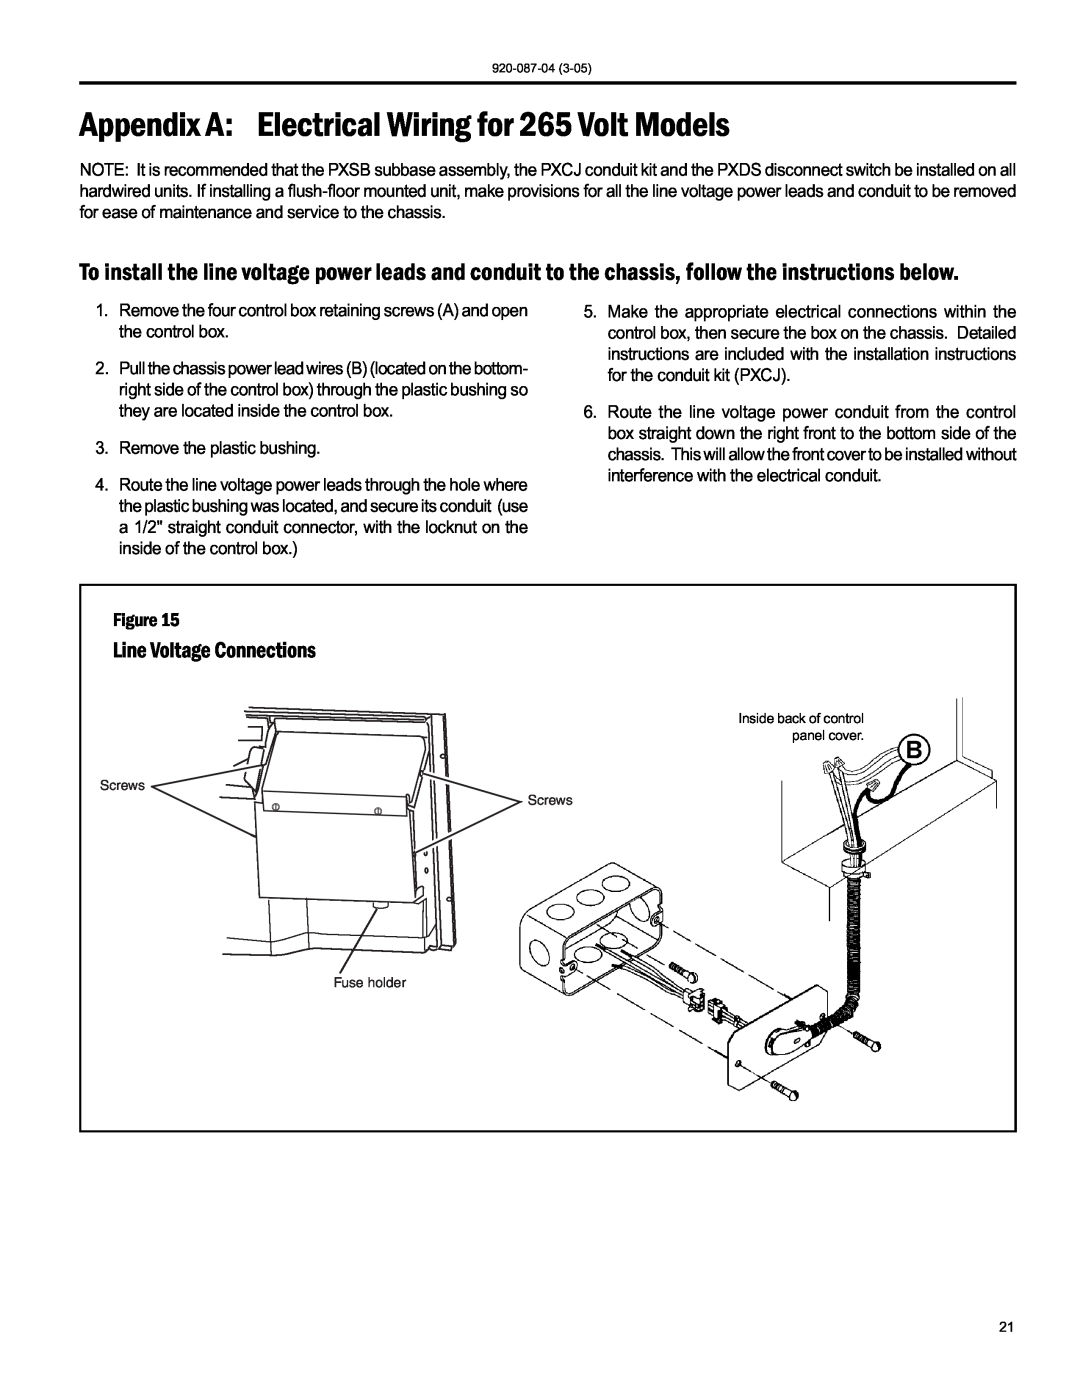 Friedrich 920-087-04 (3-05) manual Appendix A: Electrical Wiring for 265 Volt Models, Line Voltage Connections 